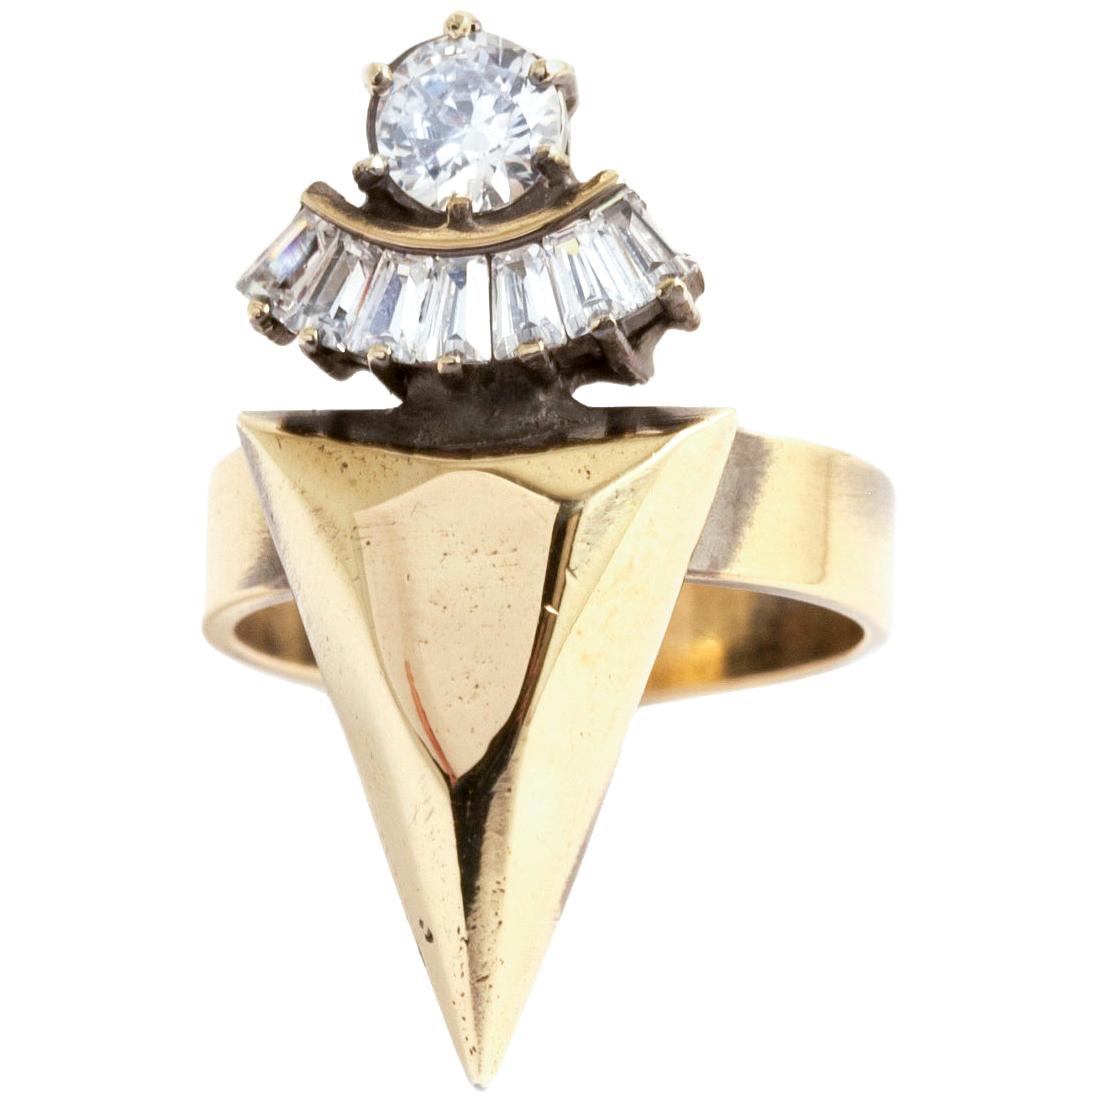 Crystal Spiked Cocktail Ring from IOSSELLIANI For Sale